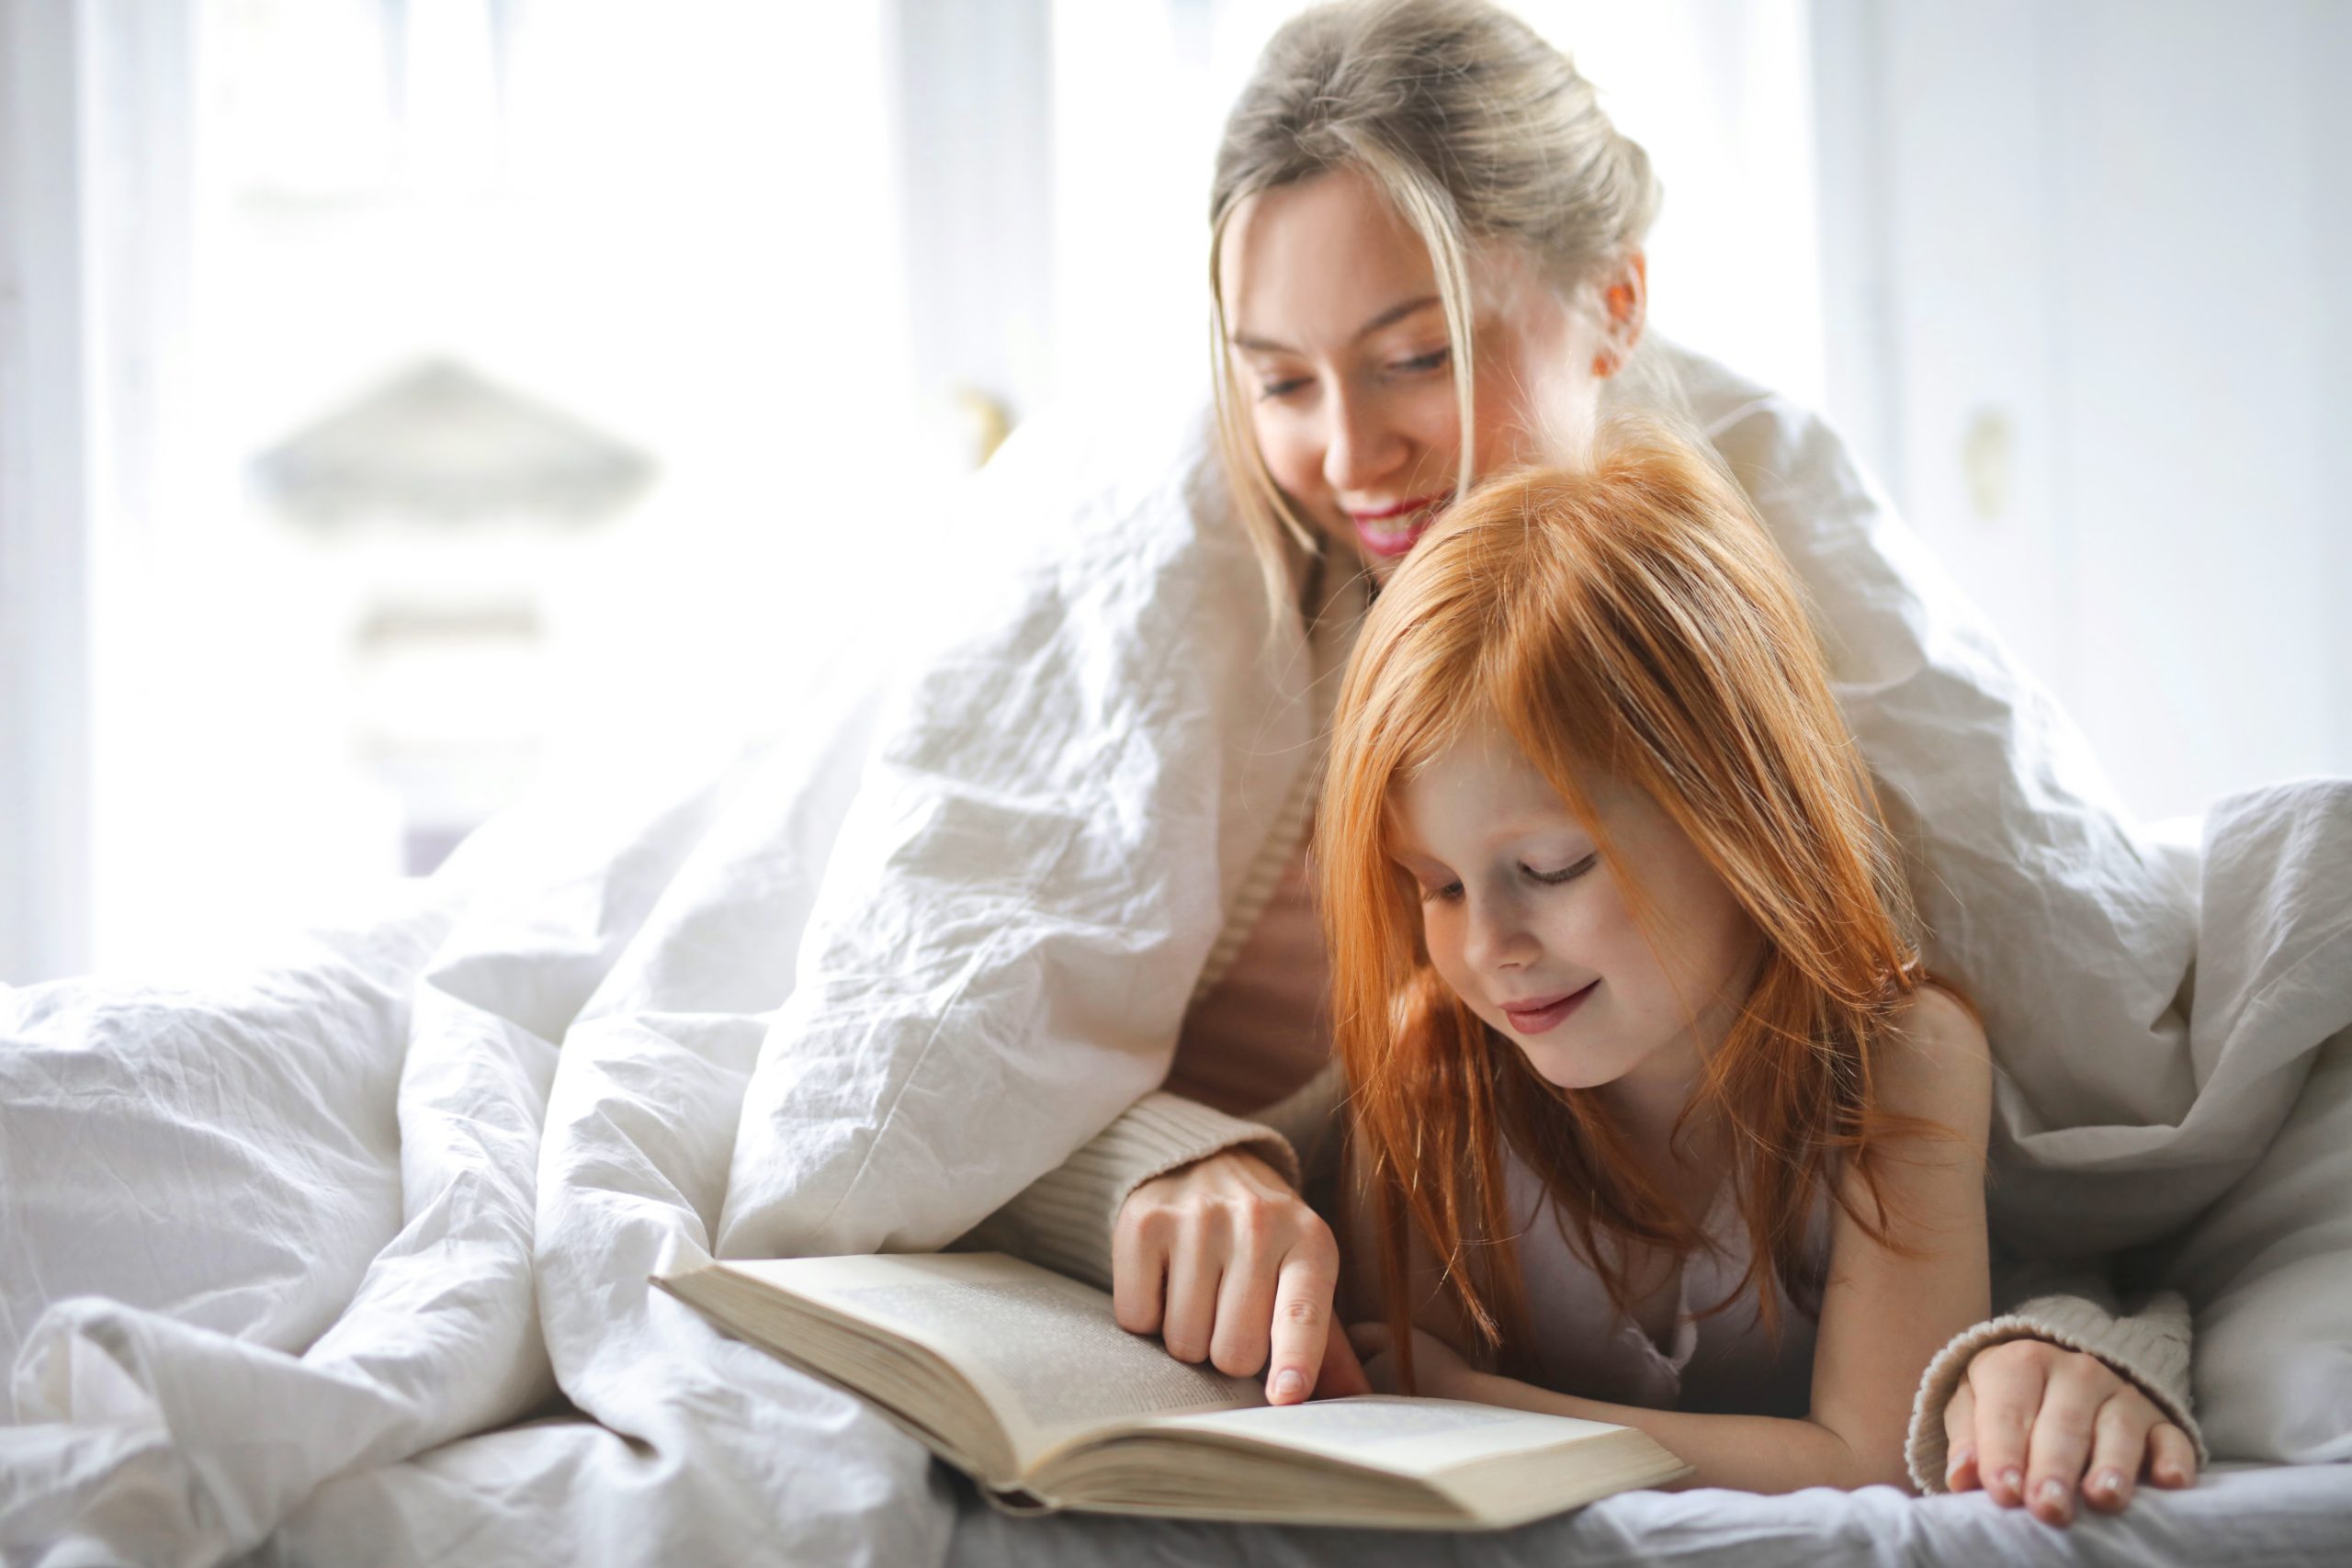 Photo Of Mother And Daughter Reading A Book While In Bed 3764491 Scaled 1, Cre8ion